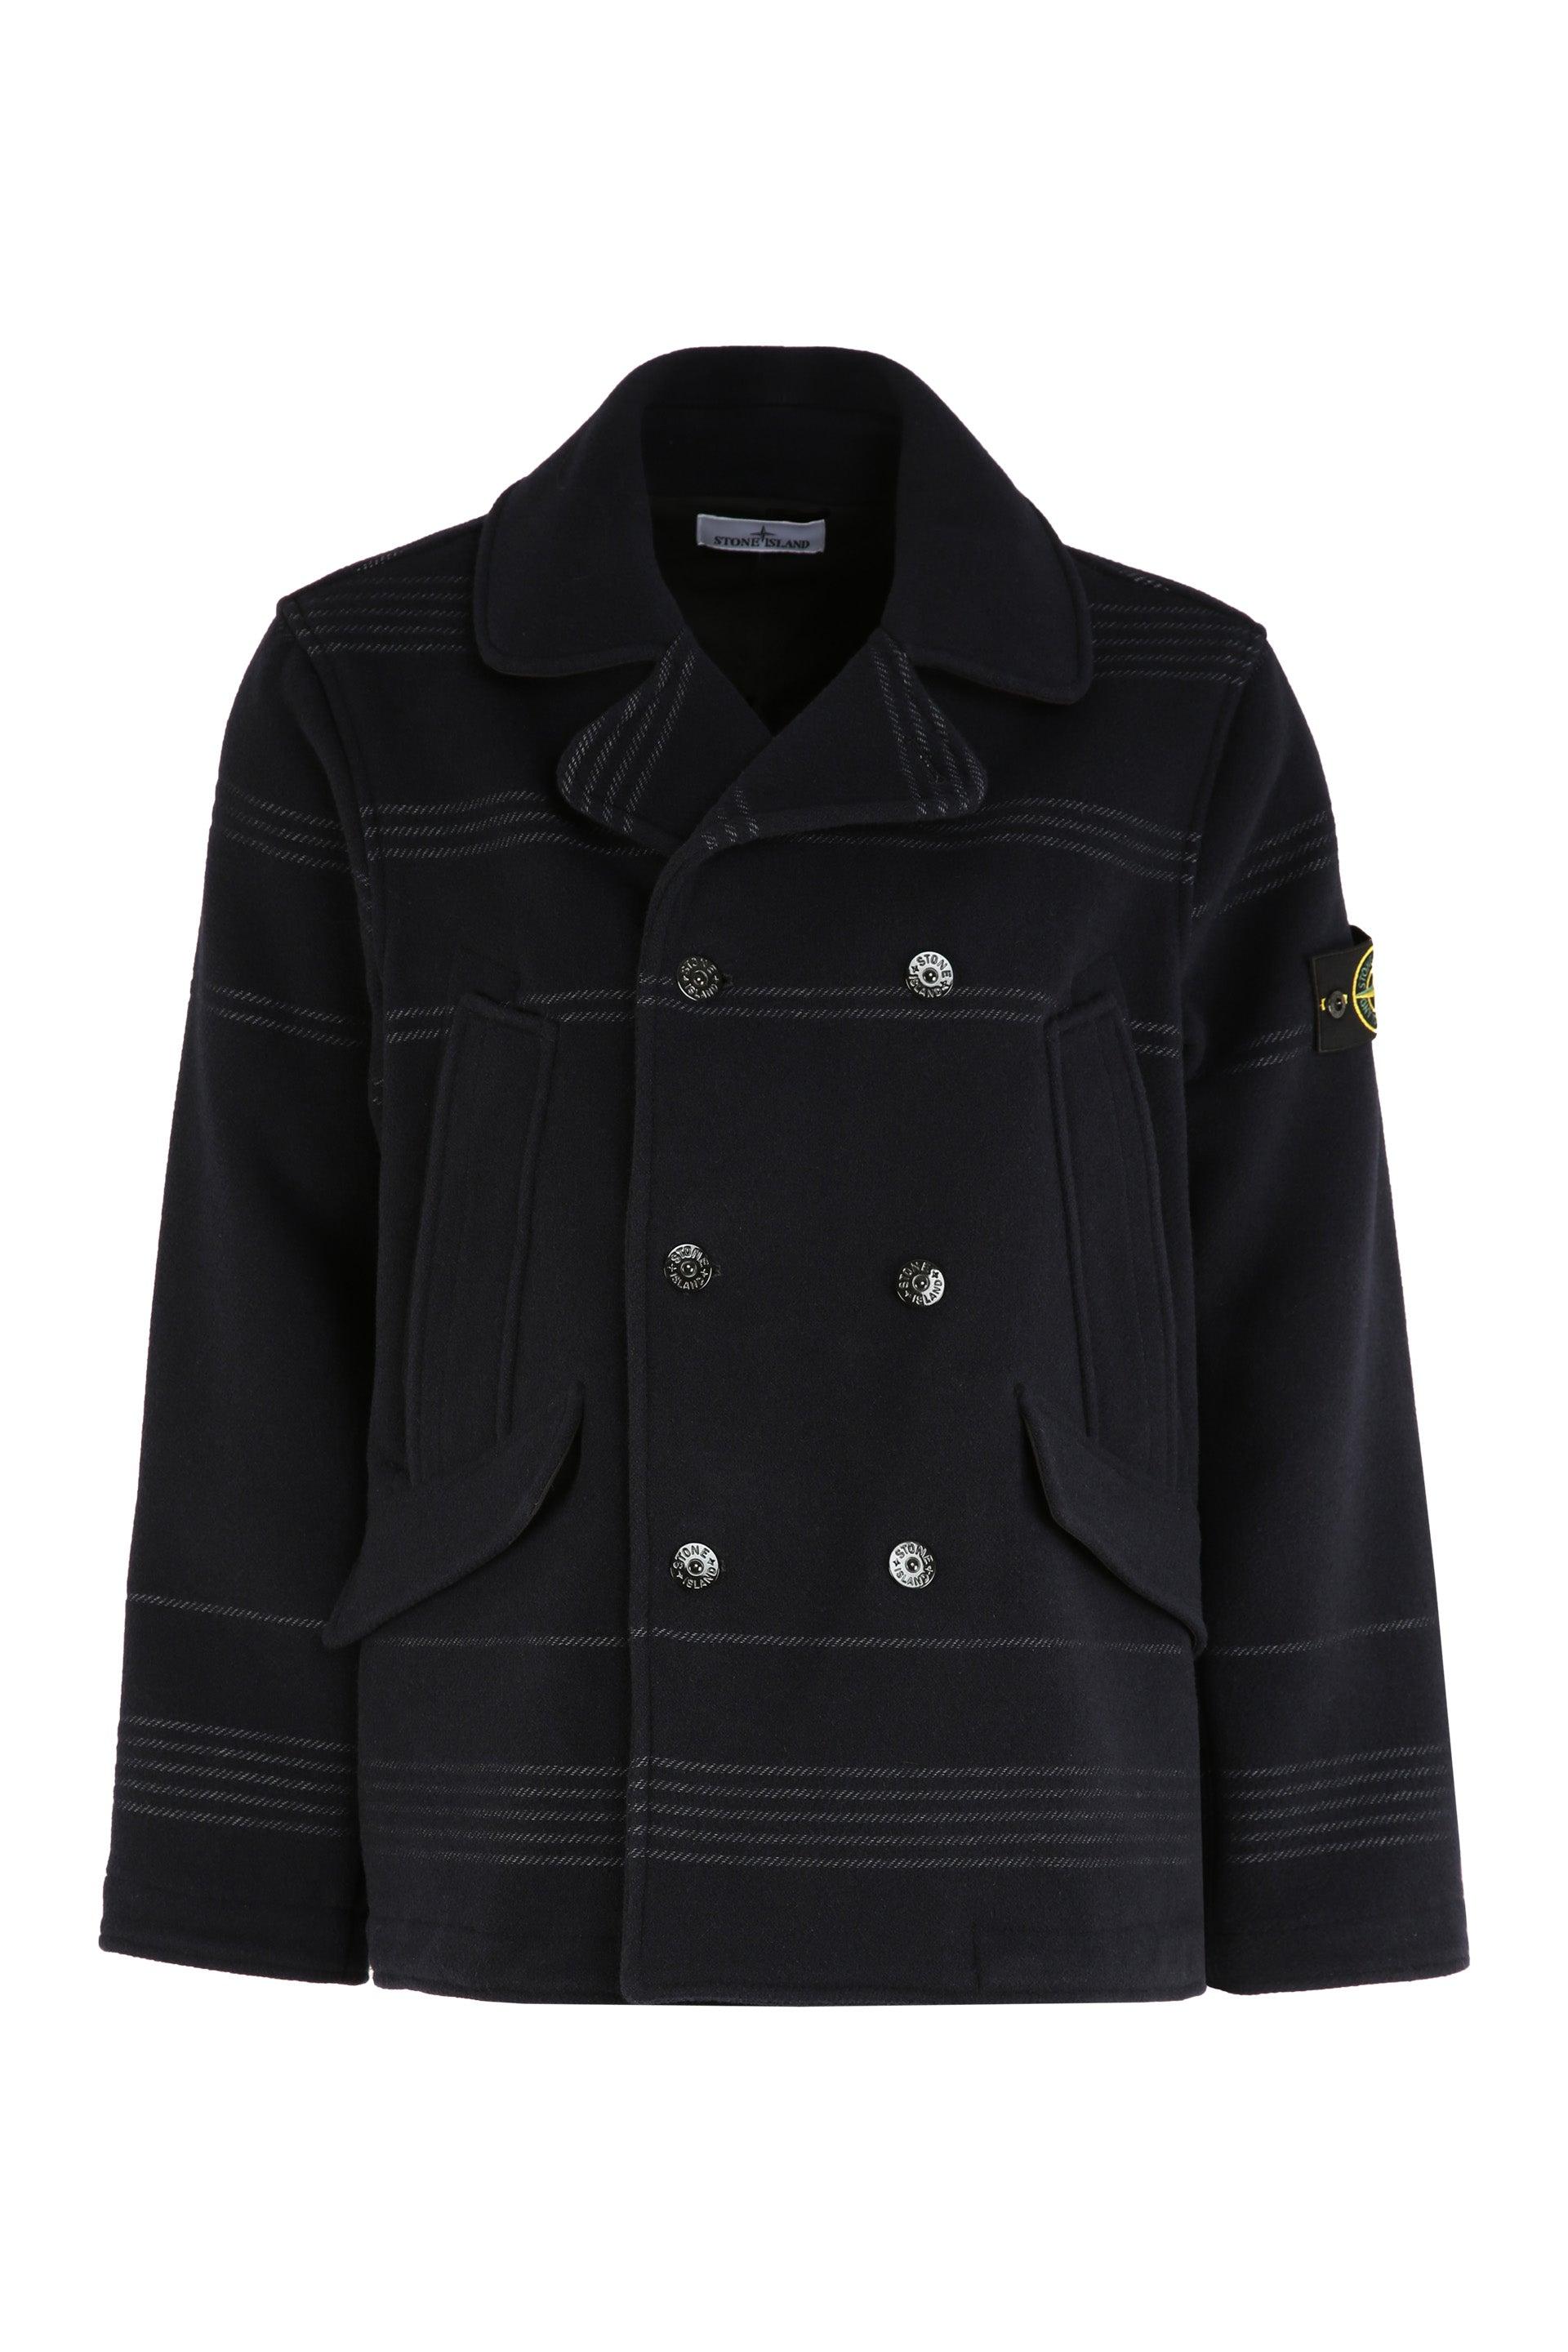 Stone Island Wool Blend Double-breasted Coat in Black for Men | Lyst